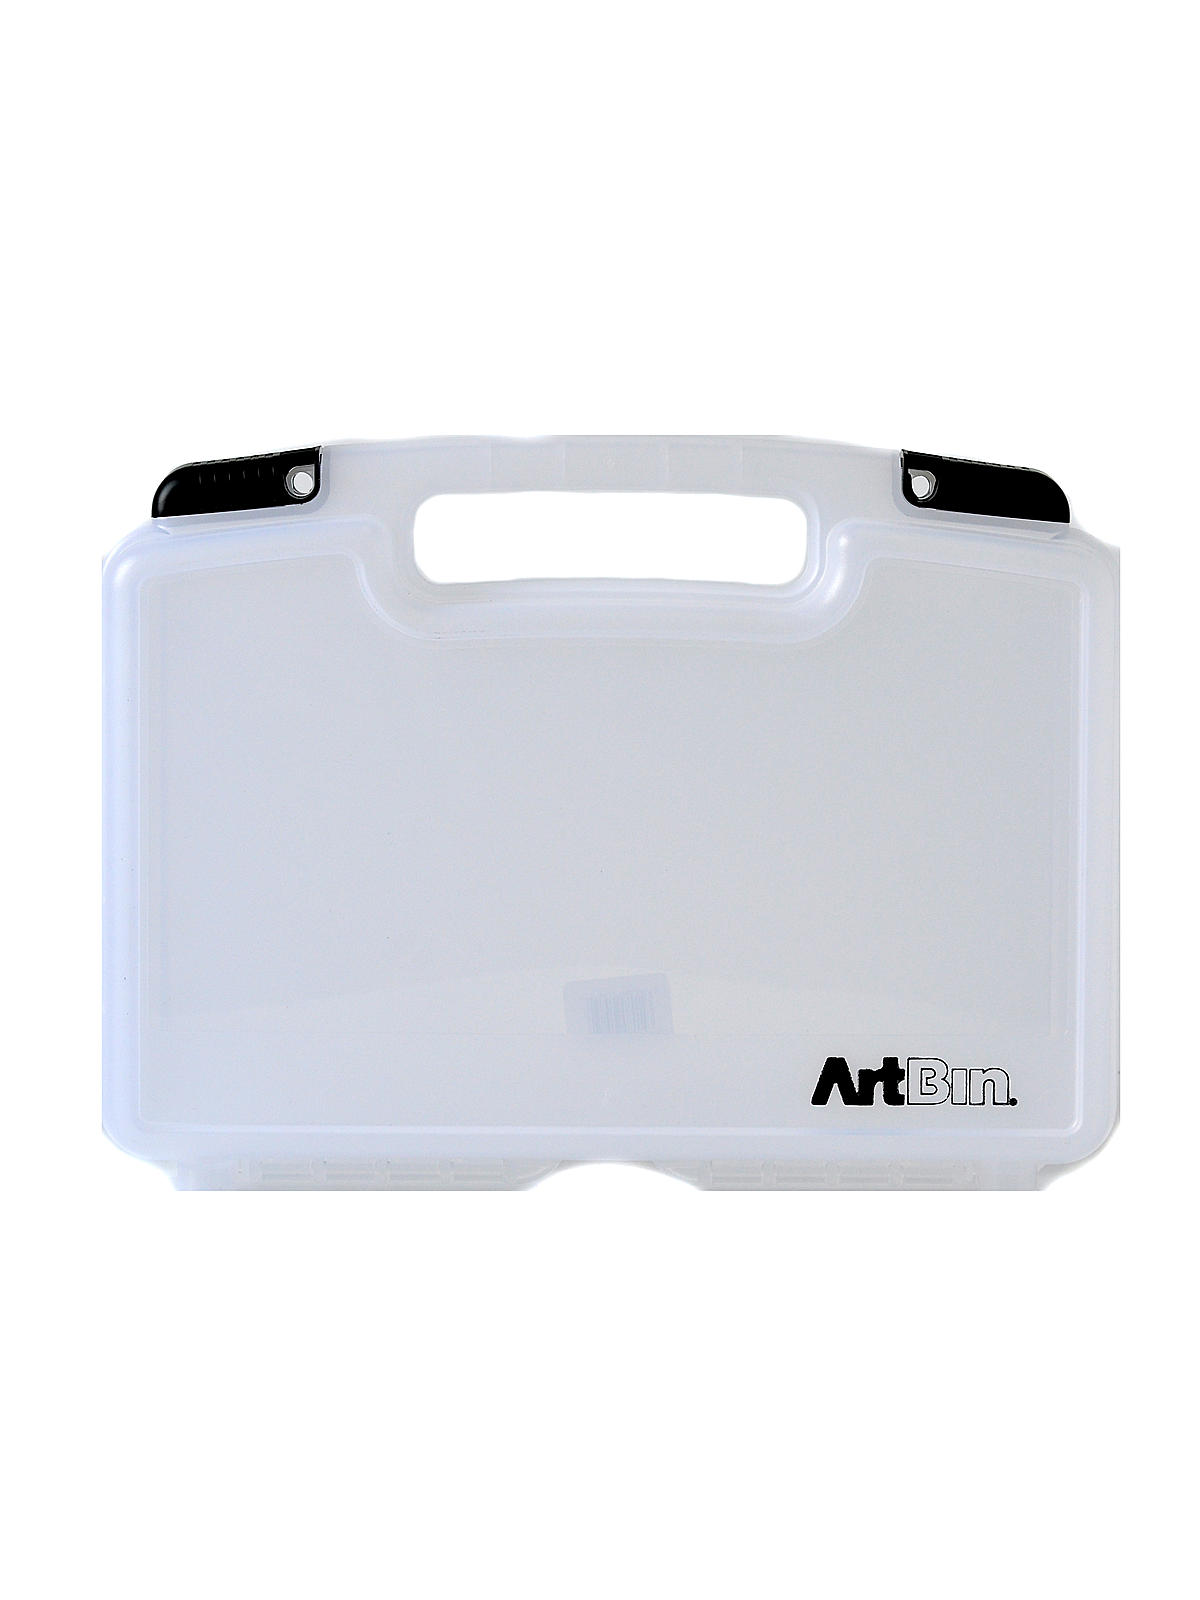 Quick View Carrying Cases 14 In. X 3 3 8 In. X 10 1 4 In.